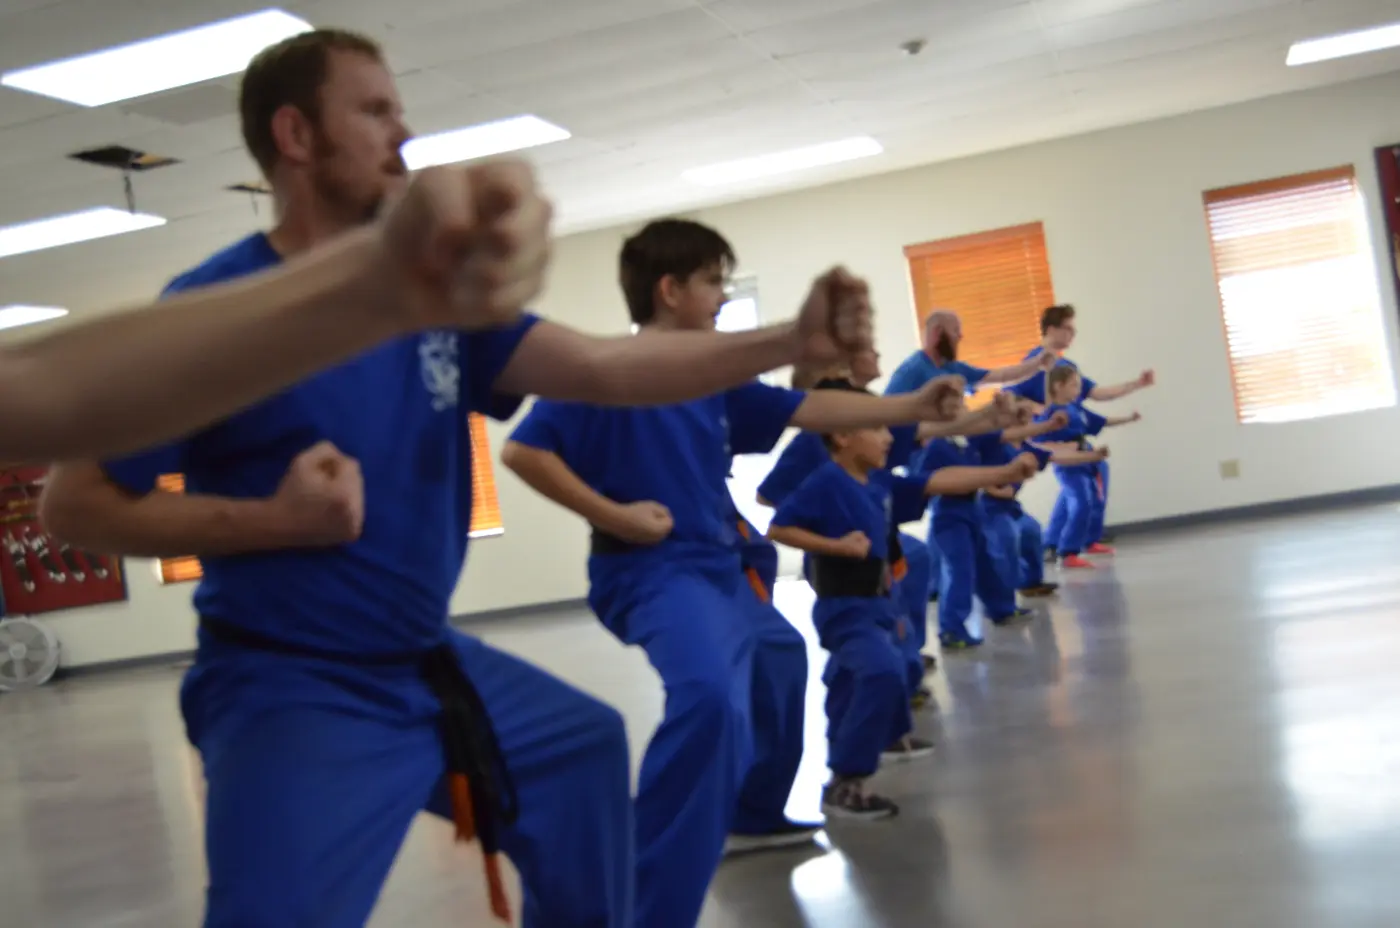 A row of students in horse stance punching